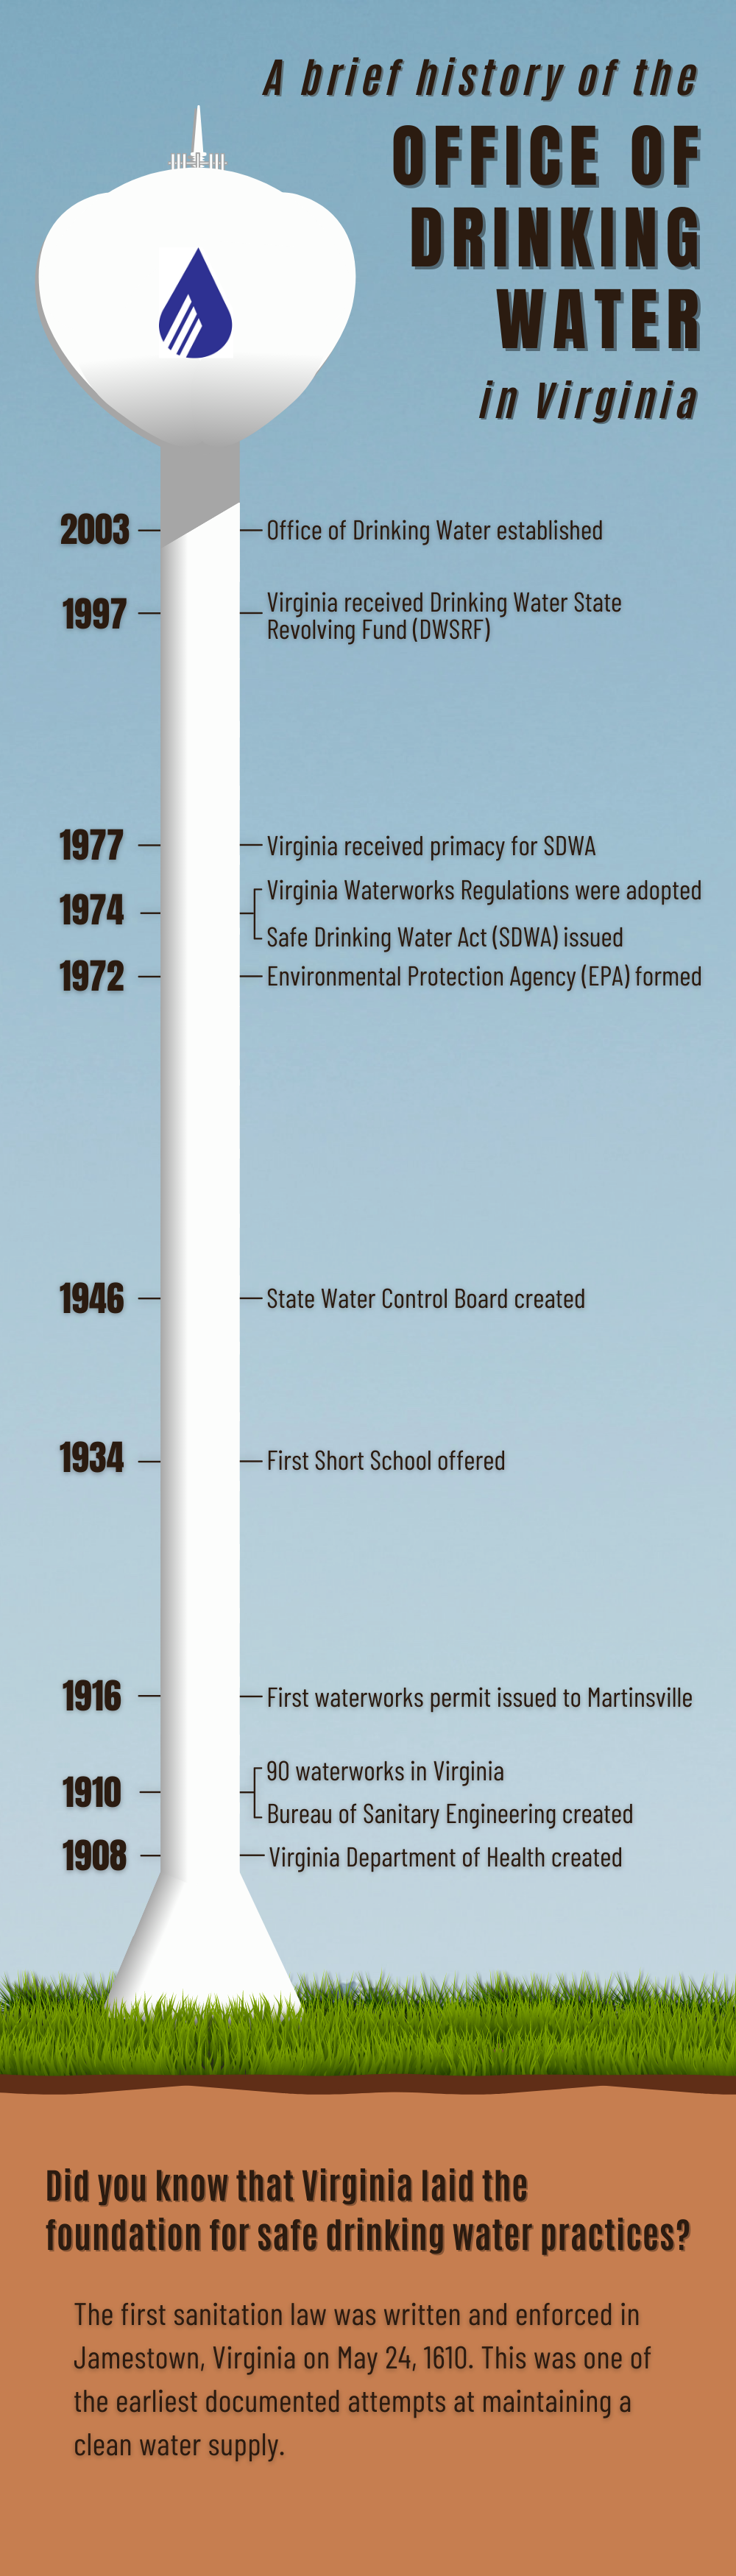 Did you know that Virginia laid the foundation for safe drinking water practices?  The first sanitation law was written and enforced in Jamestown, Virginia on May 24, 1610.  This was one of the earliest documented attempts at maintaining a clean water supply.